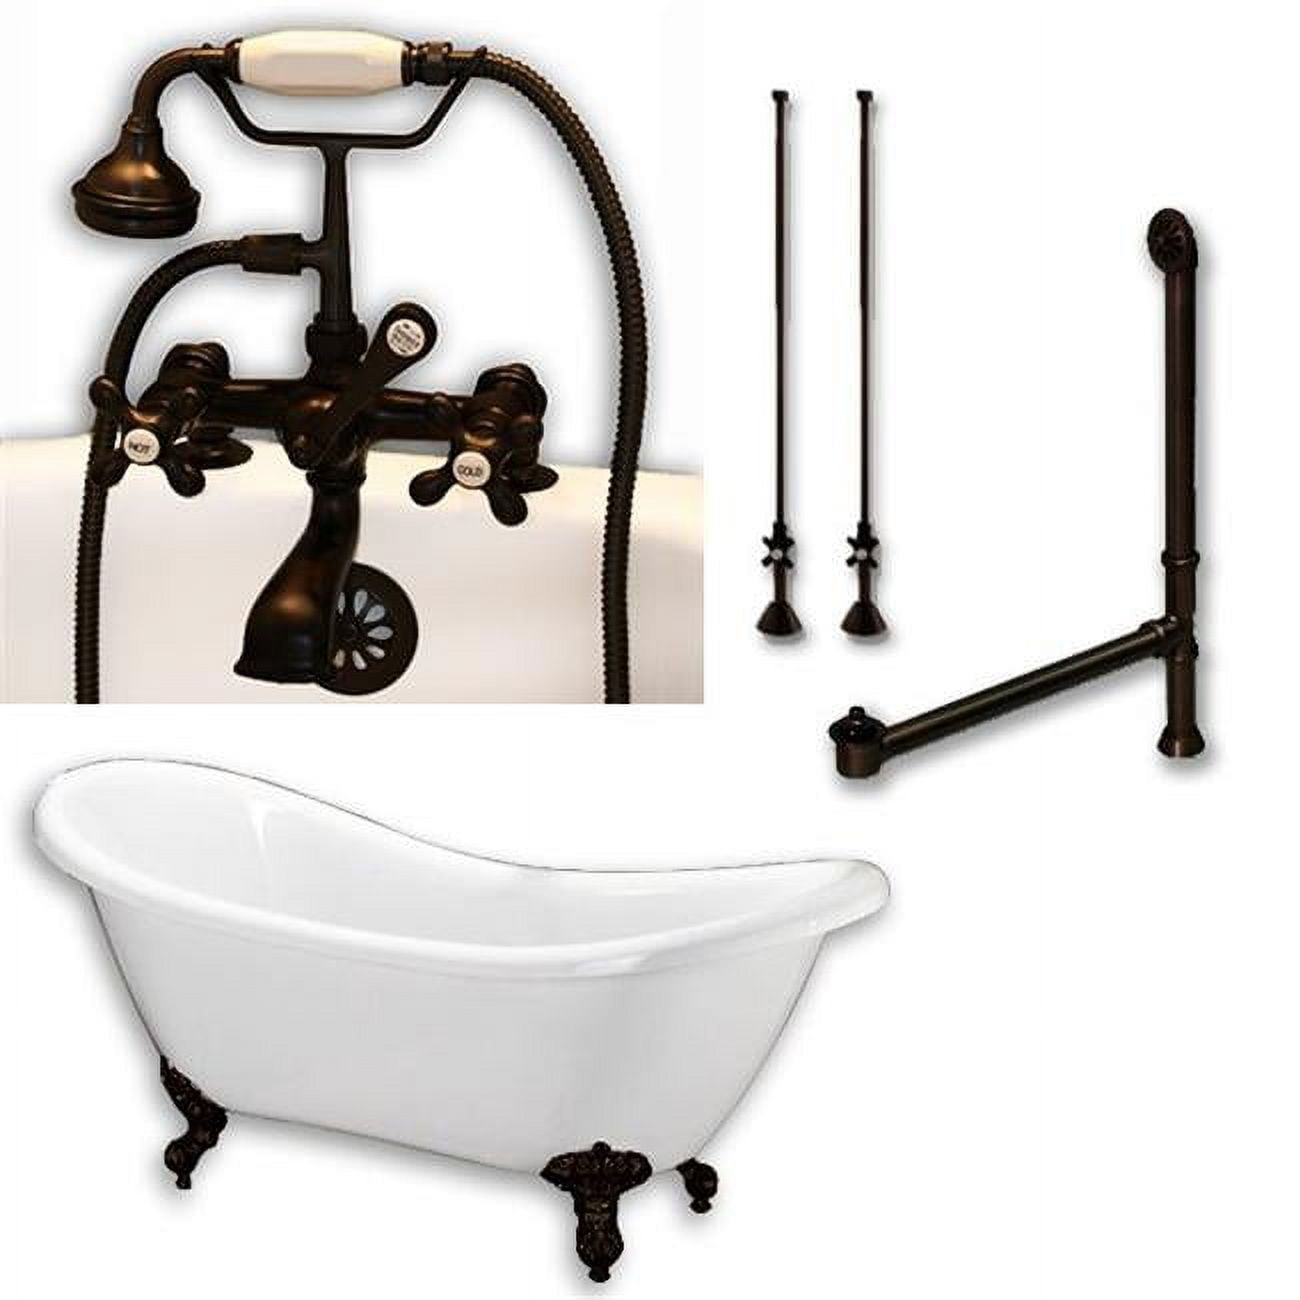 Ades-ped-463d-2-pkg-orb-7dh Acrylic Double Ended Slipper Tub With 2 In. Pedestal Holes Deck Risers, Classic Telephone Style Faucet & Orb Plumbing